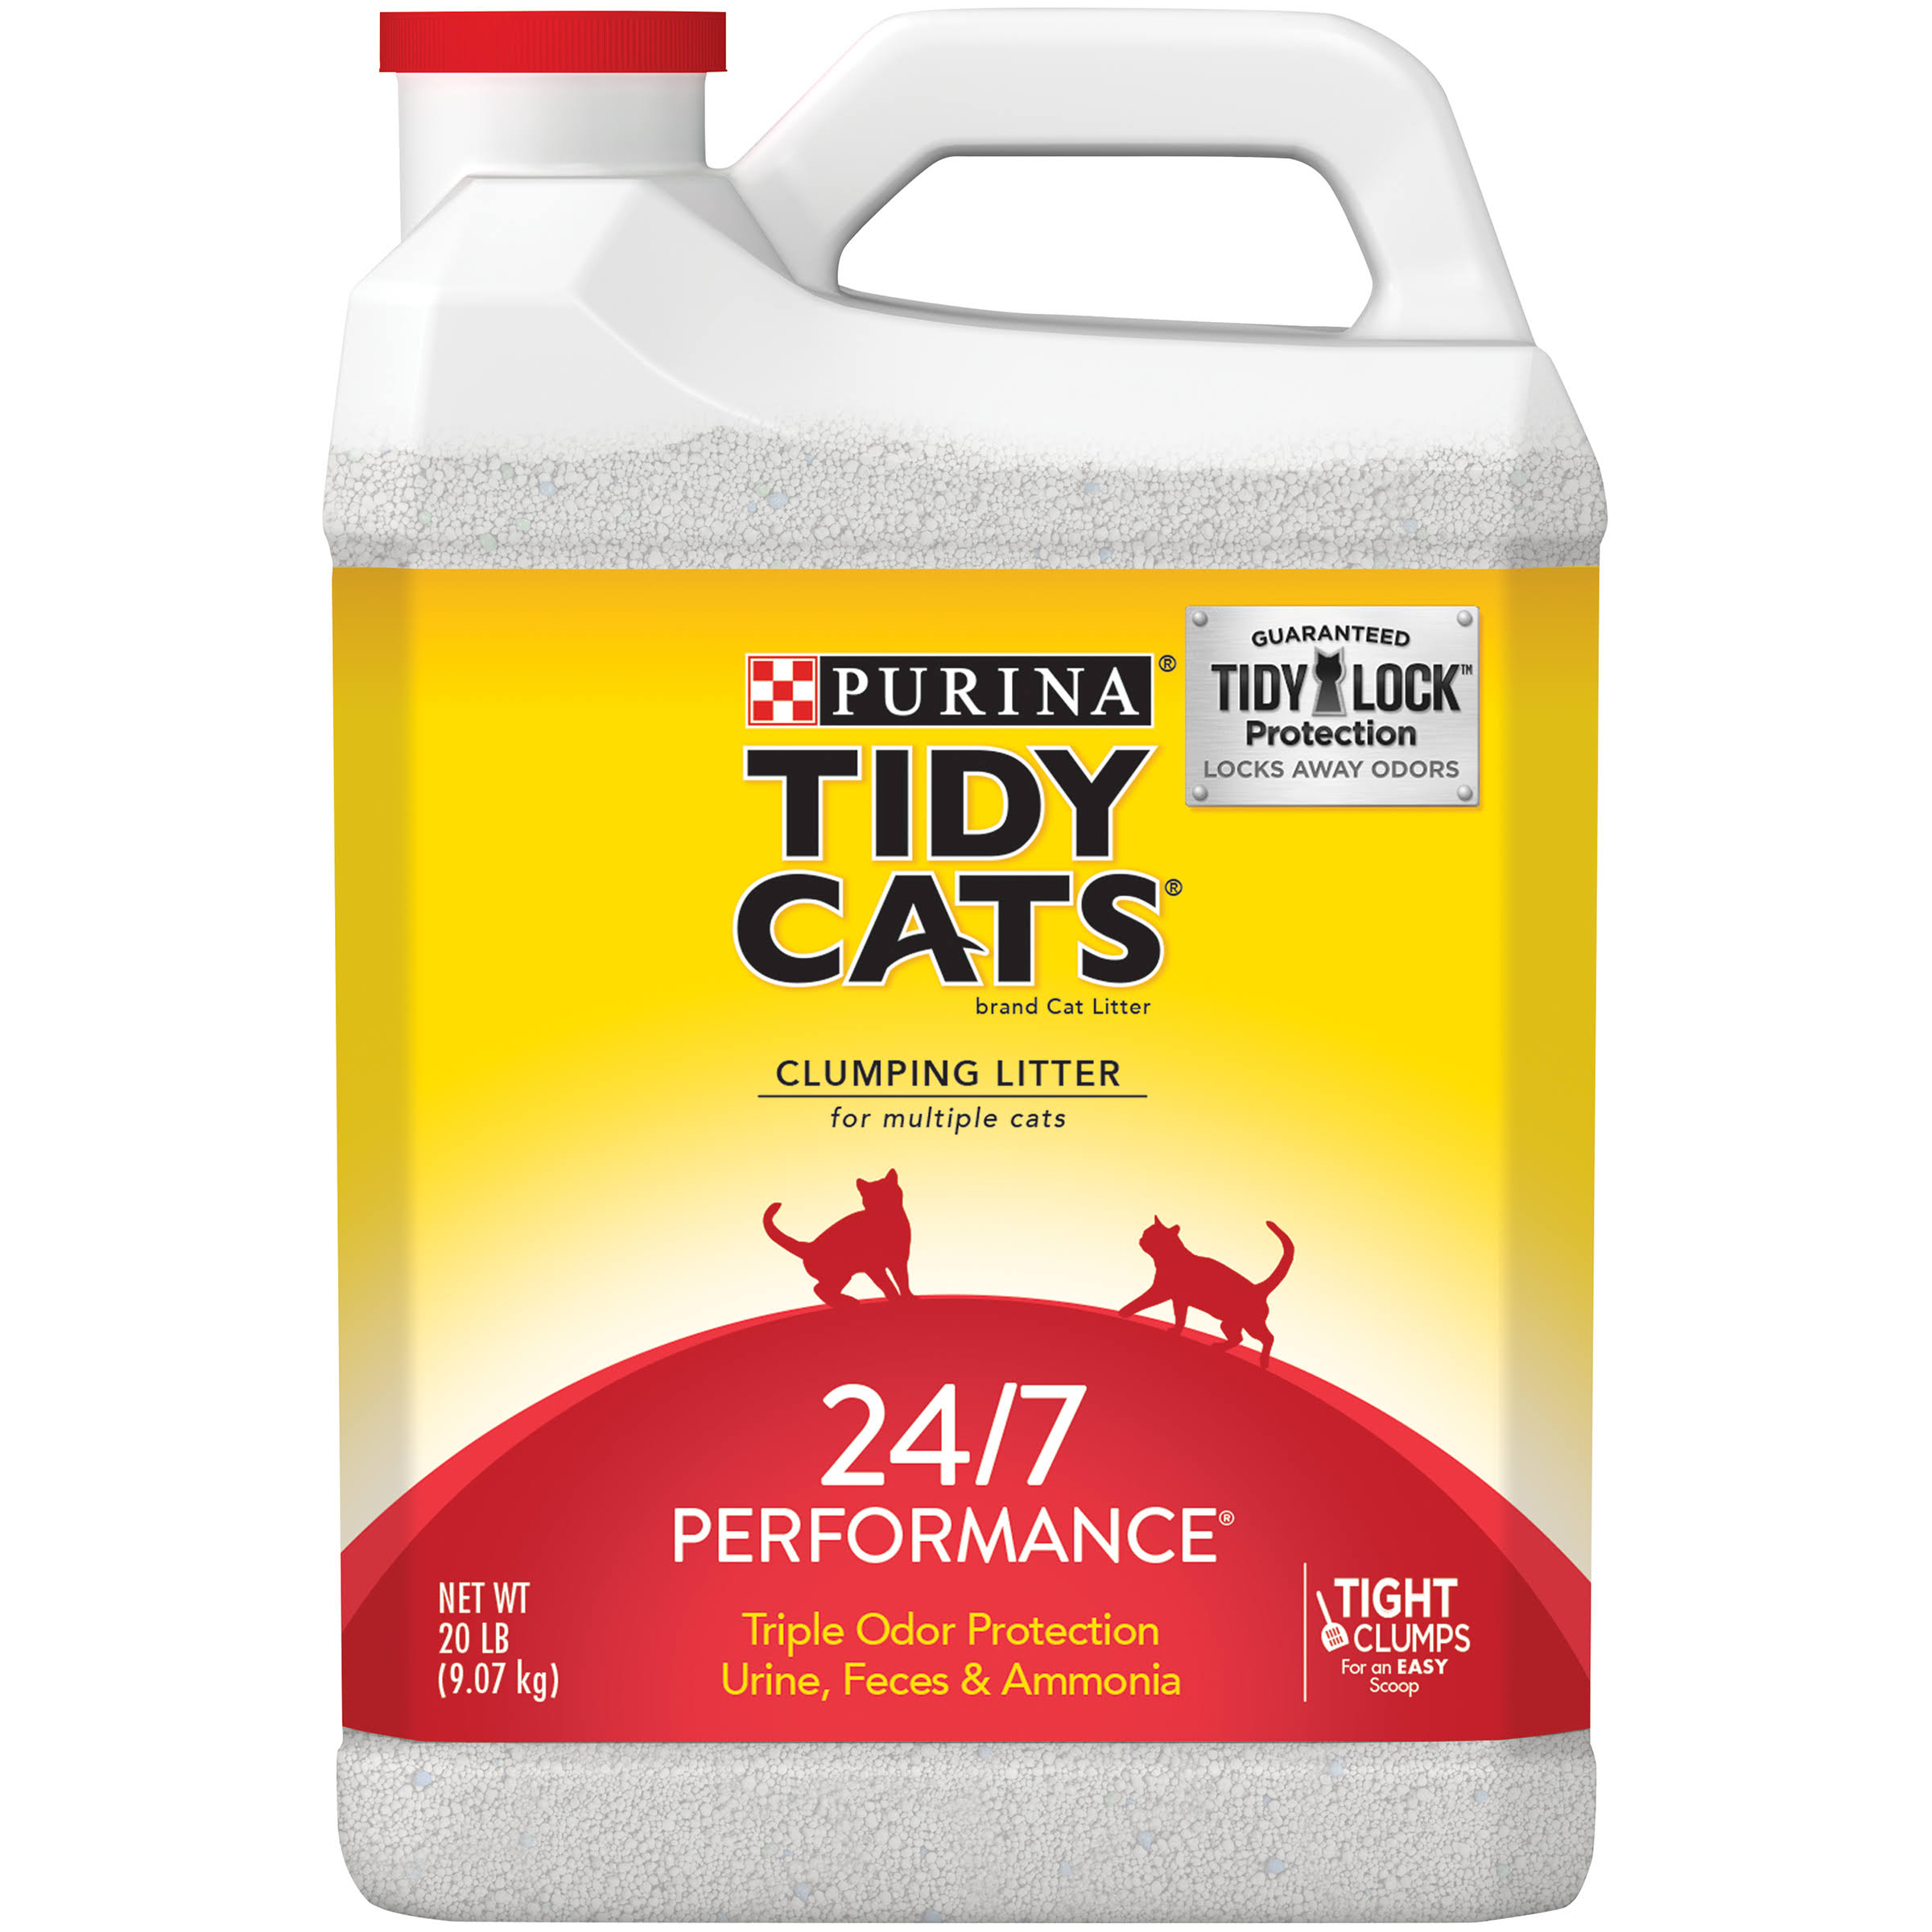 Purina Tidy Cats Clumping Litte for Multiple Cats 24/7 Performance